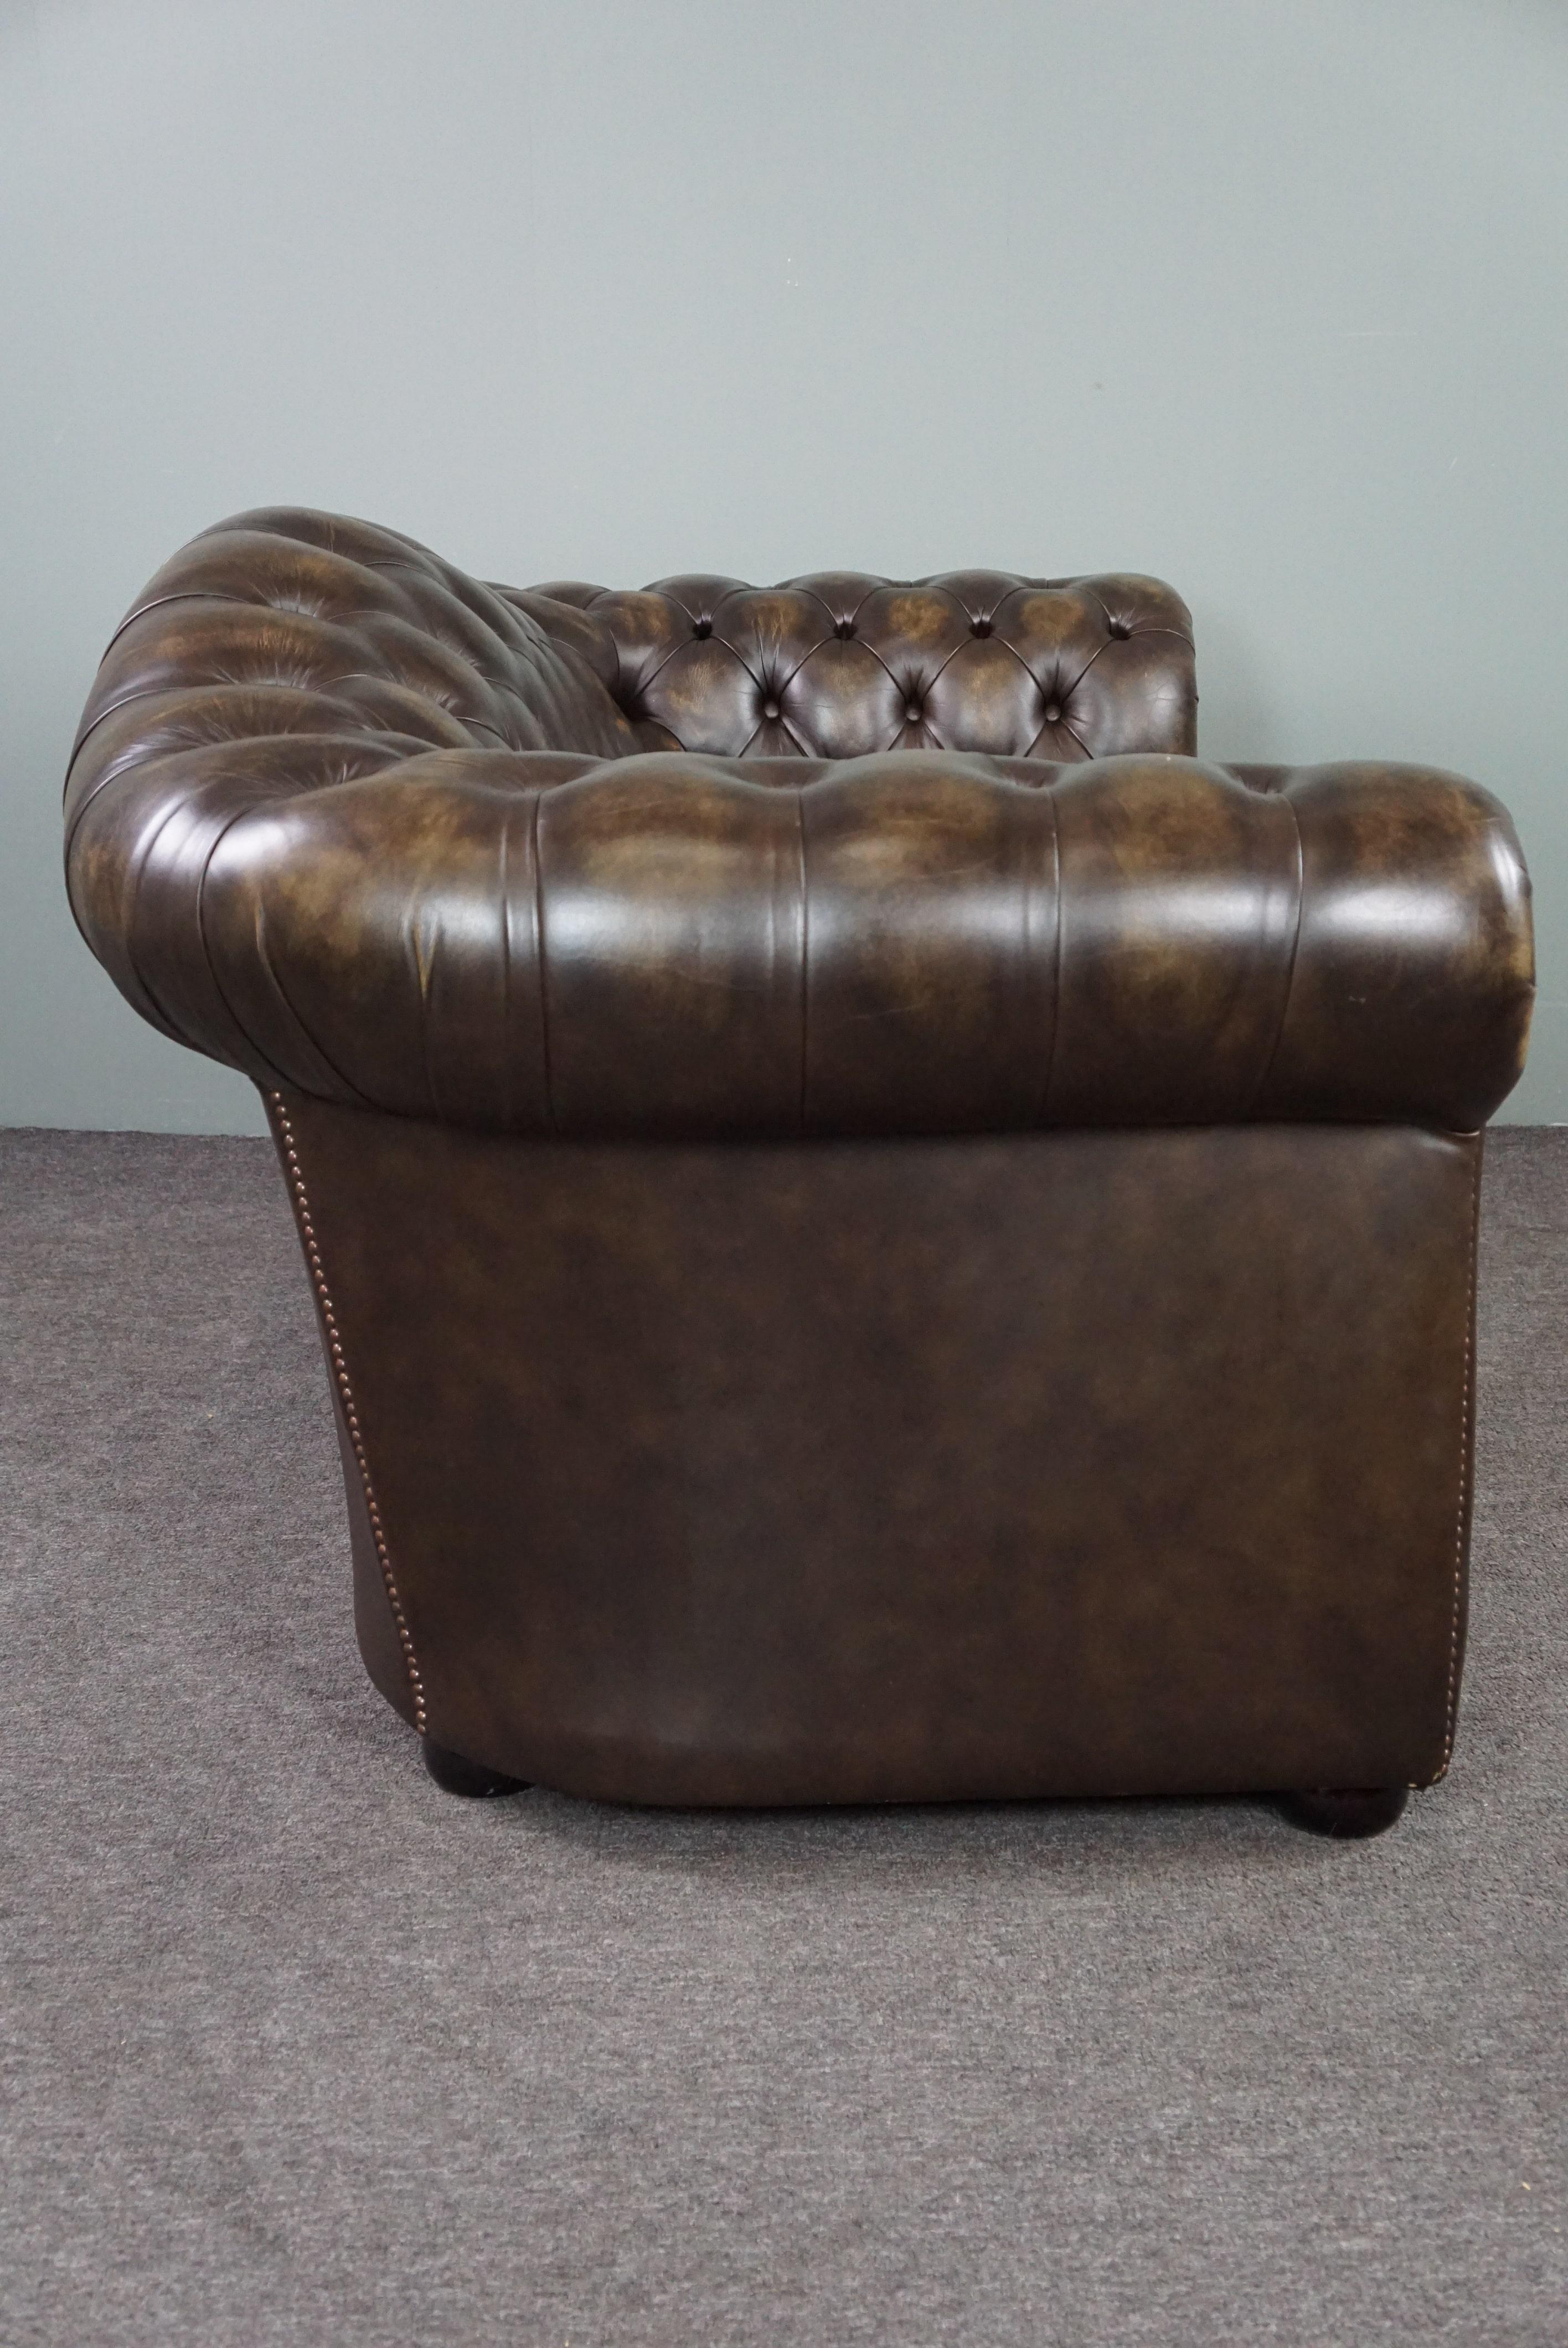 Offered is this almost new cowhide Chesterfield sofa, 2 seater.

This cowhide Chesterfield sofa is a great example because of its design, color and appearance. The sofa has a shapely padded back and armrests that are beautifully finished with